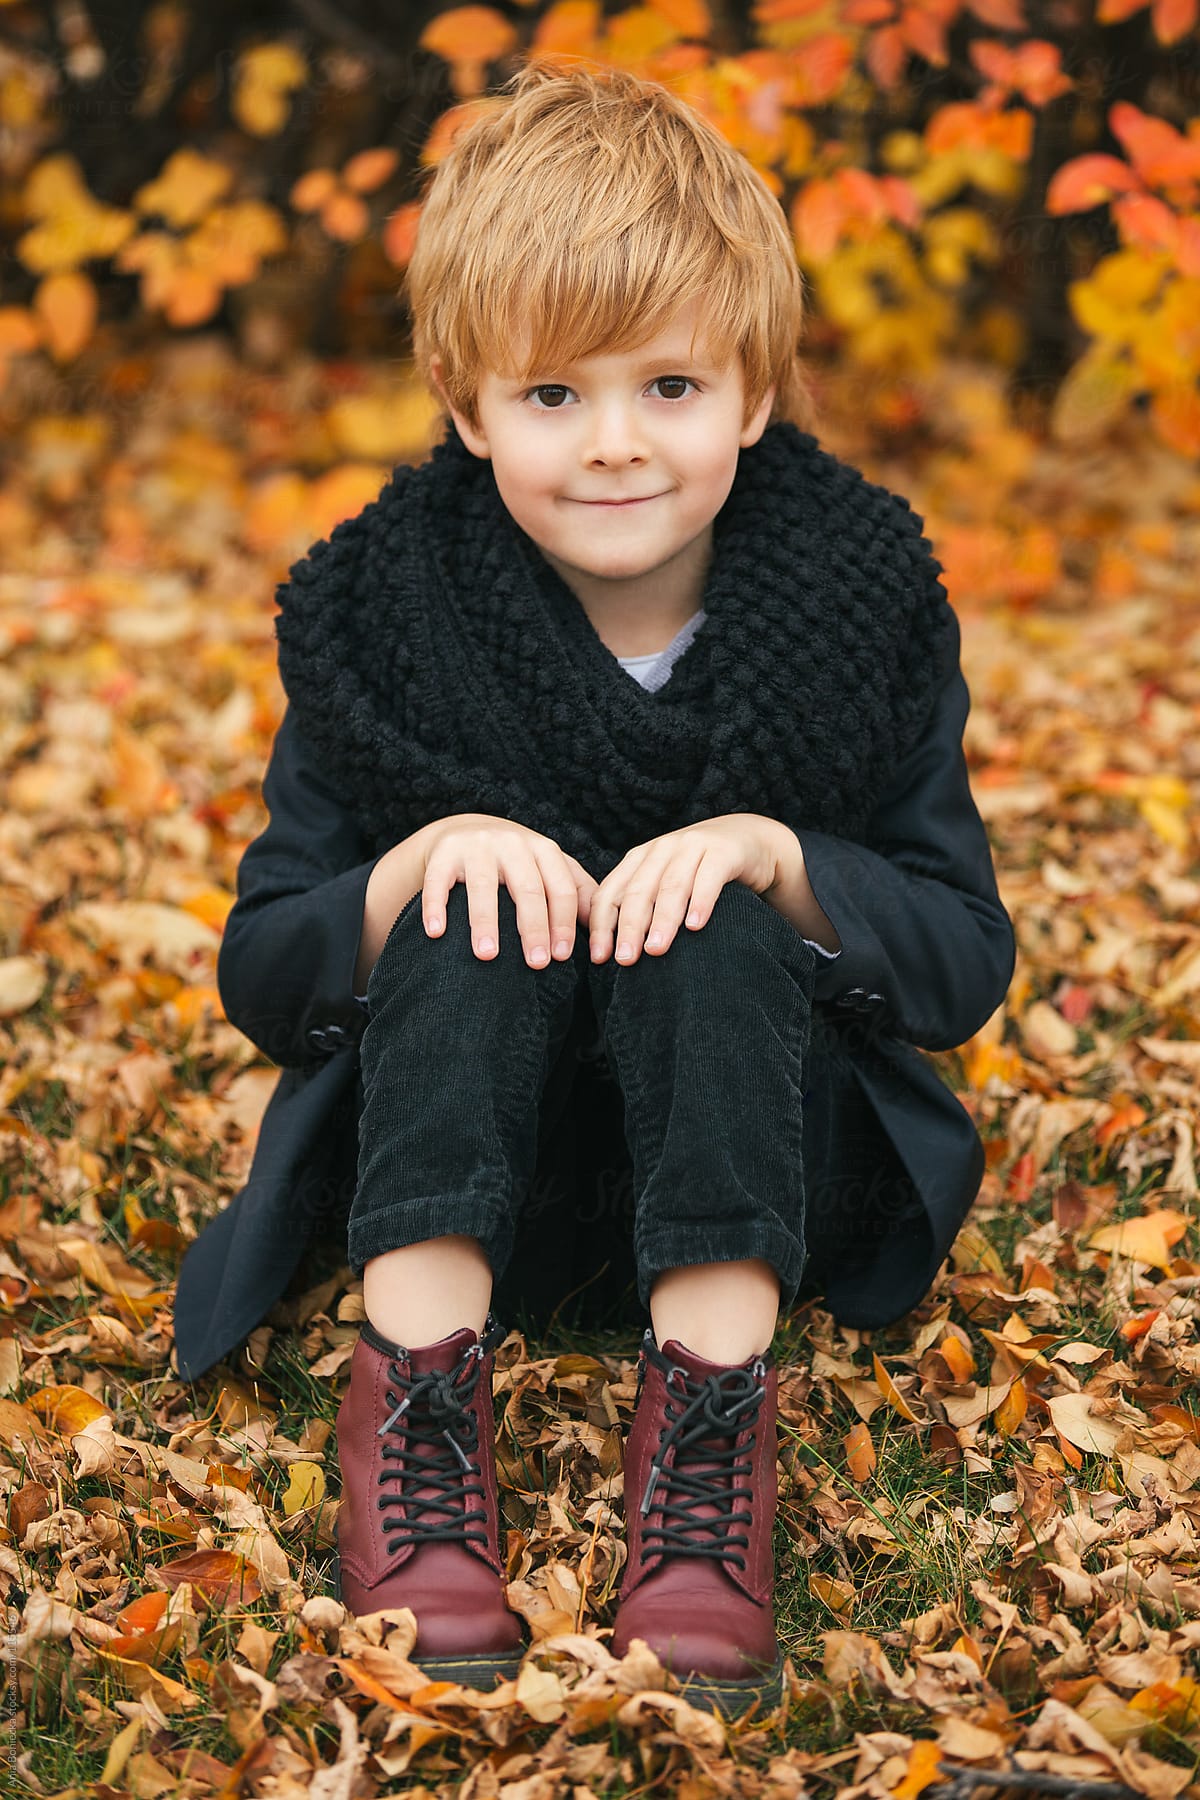 A young boy sitting on a ground covered with fall leaves smiling at camera